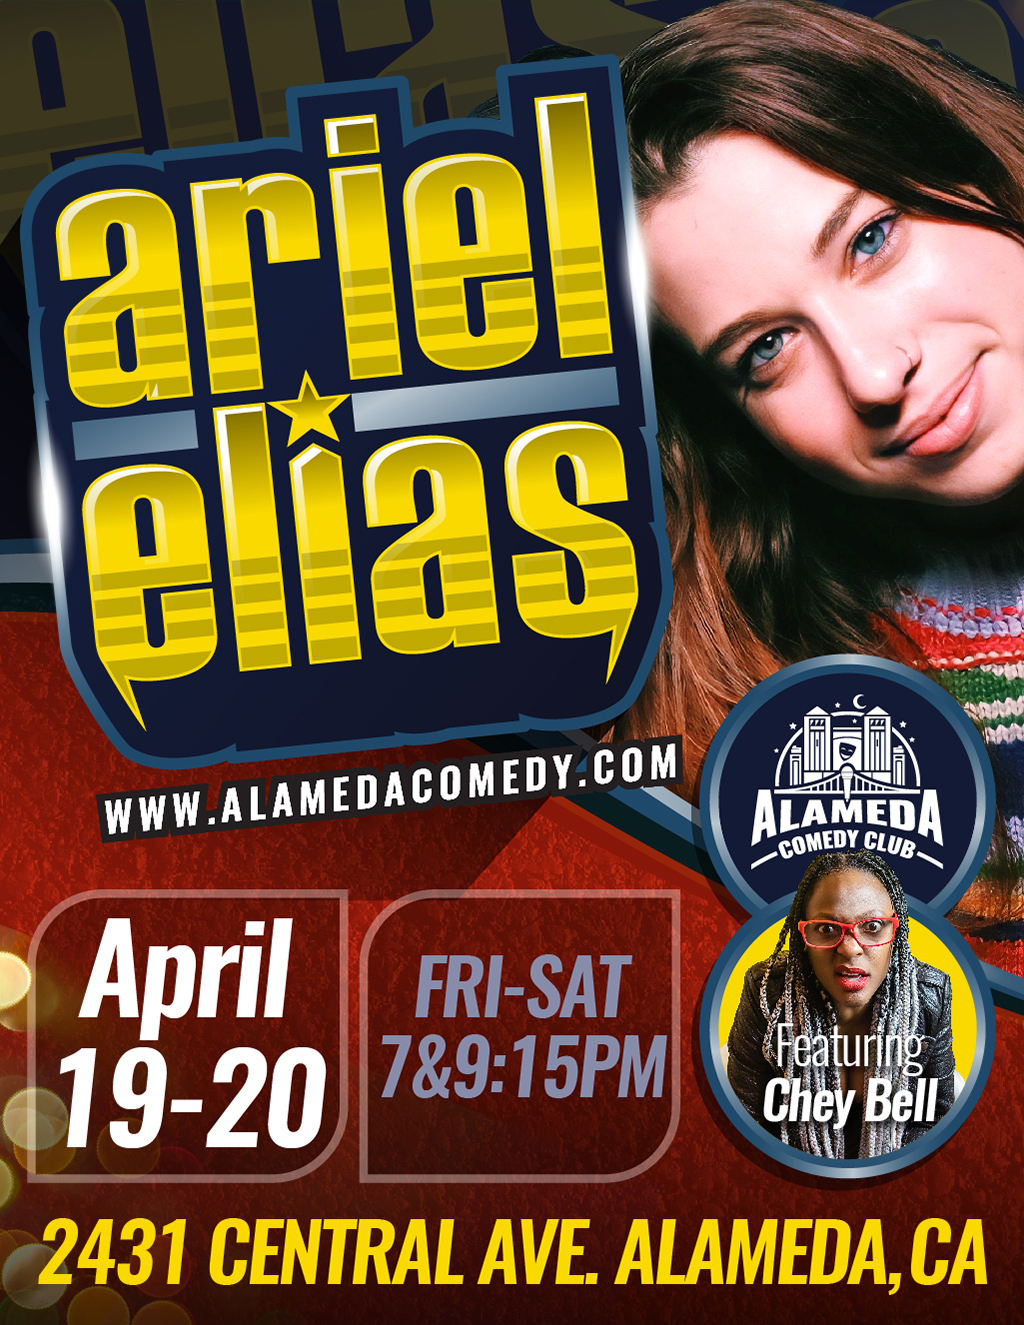 Alameda Comedy Club Join Us for a Night of Laughter at the Alameda Comedy Club promotion flier on Digifli com